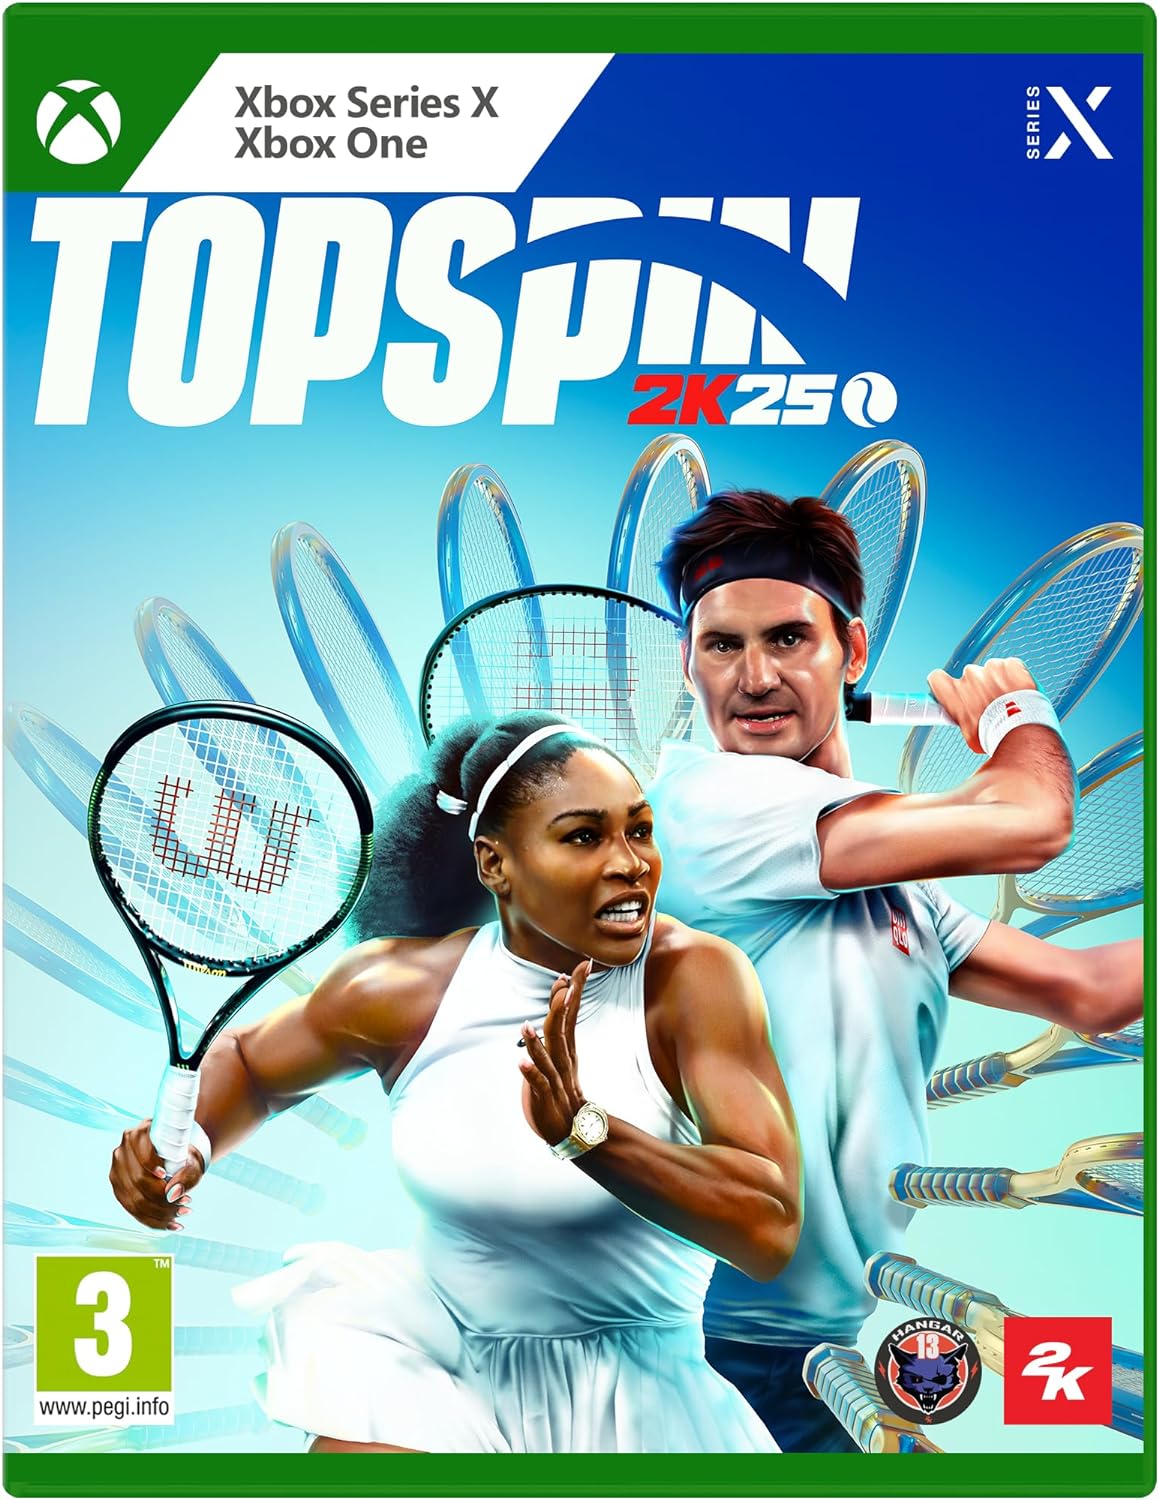 TopSpin 2K25 Digital Download Key (Xbox One/Series X): VPN Activated Key